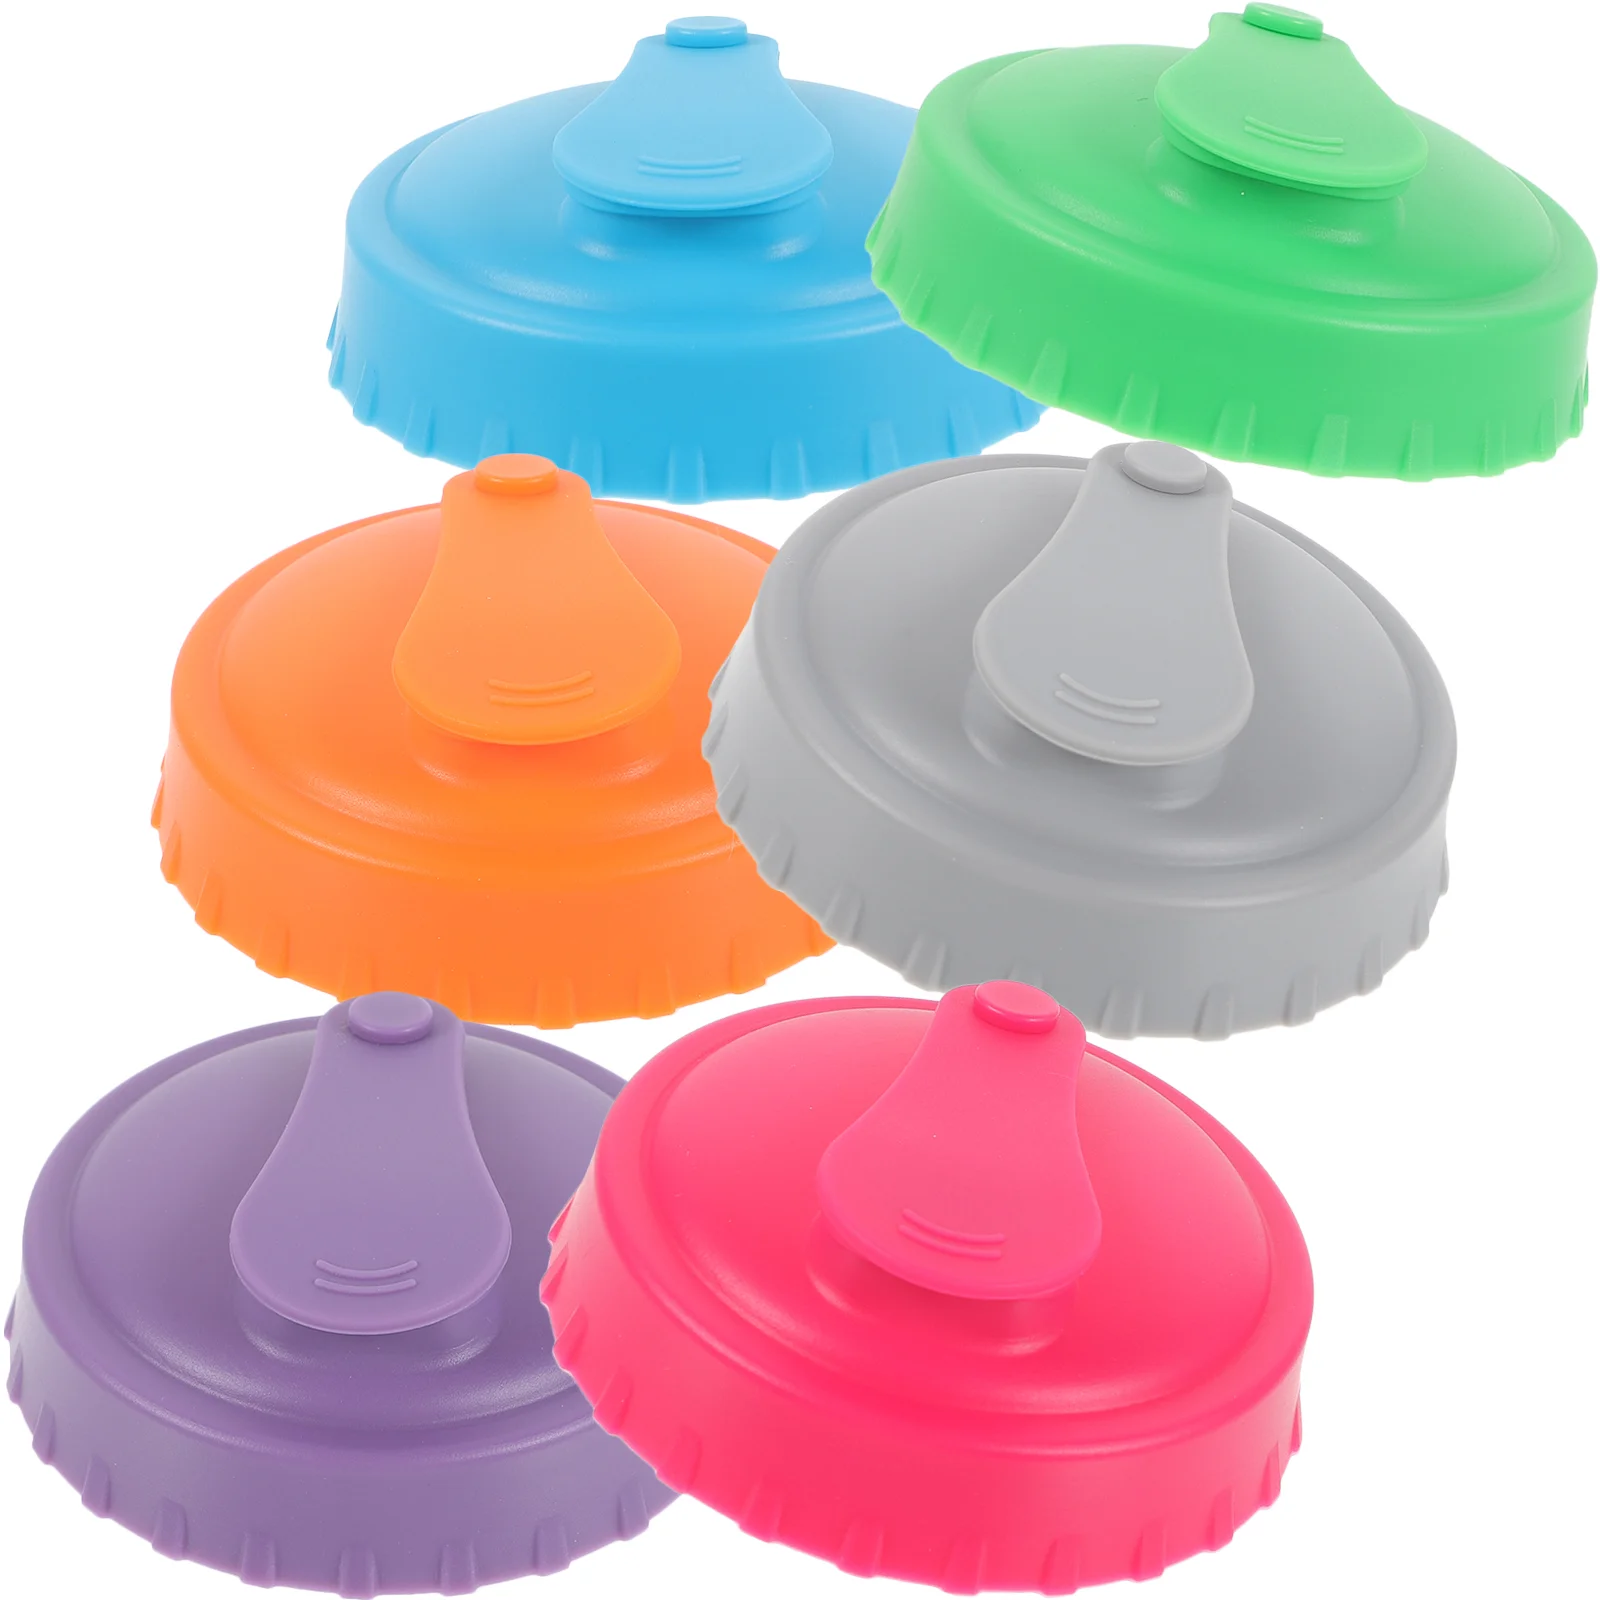 

6 Pcs Silicone Can Lid Drink Soda Covers Leak-proof Cap Drinking Drinks Bottle Lids Caps For Cola